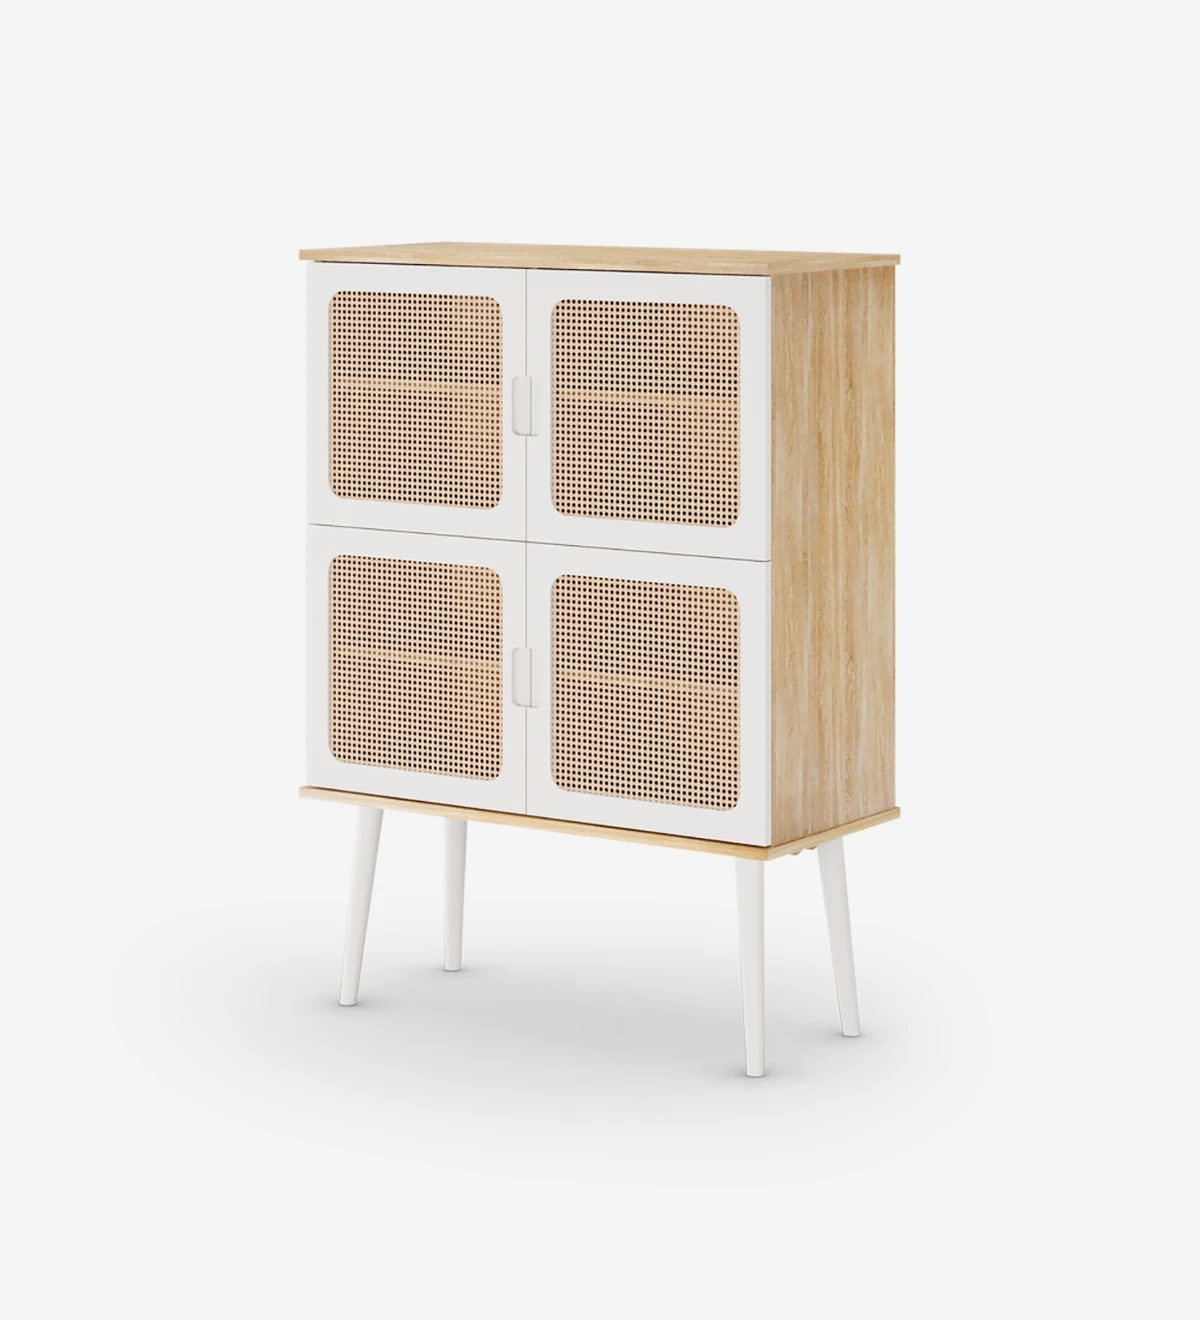 Cupboard with 4 doors detailed in rattan, structure in natural color oak, pearl lacquered doors and feet.